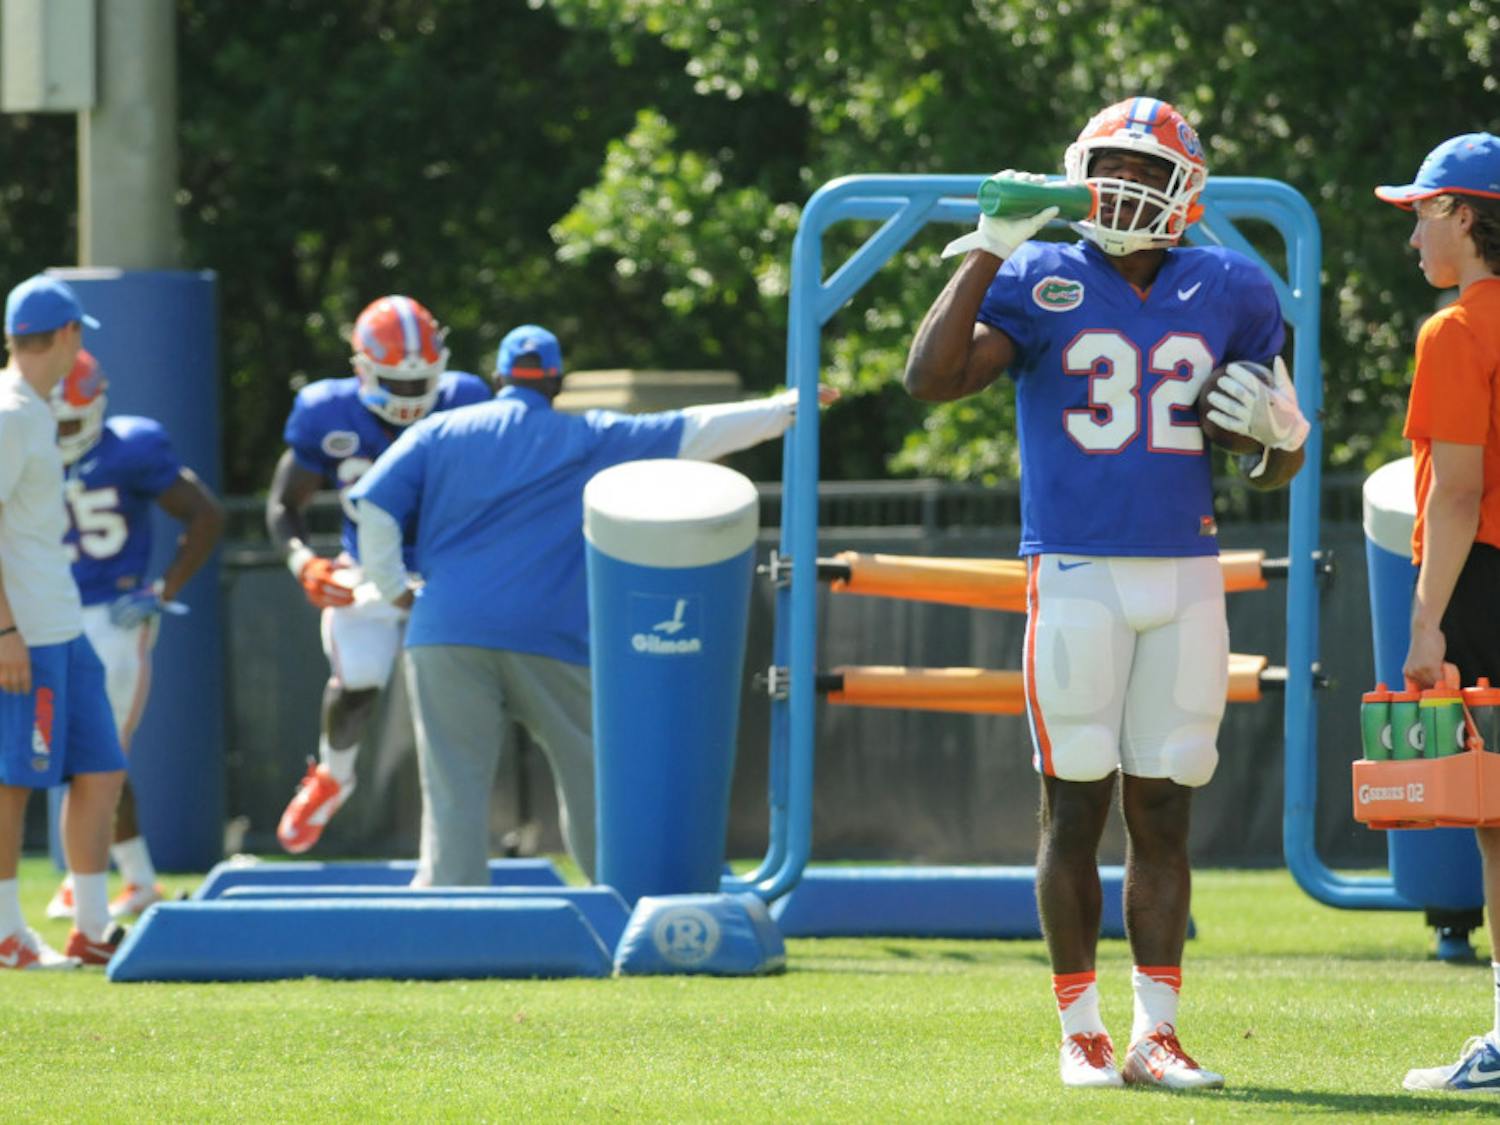 Jordan Cronkrite (32) takes a break from Florida's Spring practice while running backs coach Tim Skipper (middle) watches Mark Thompson (24) run drills. The Gators practiced for two hours at the Sanders Practice Fields on March 30.